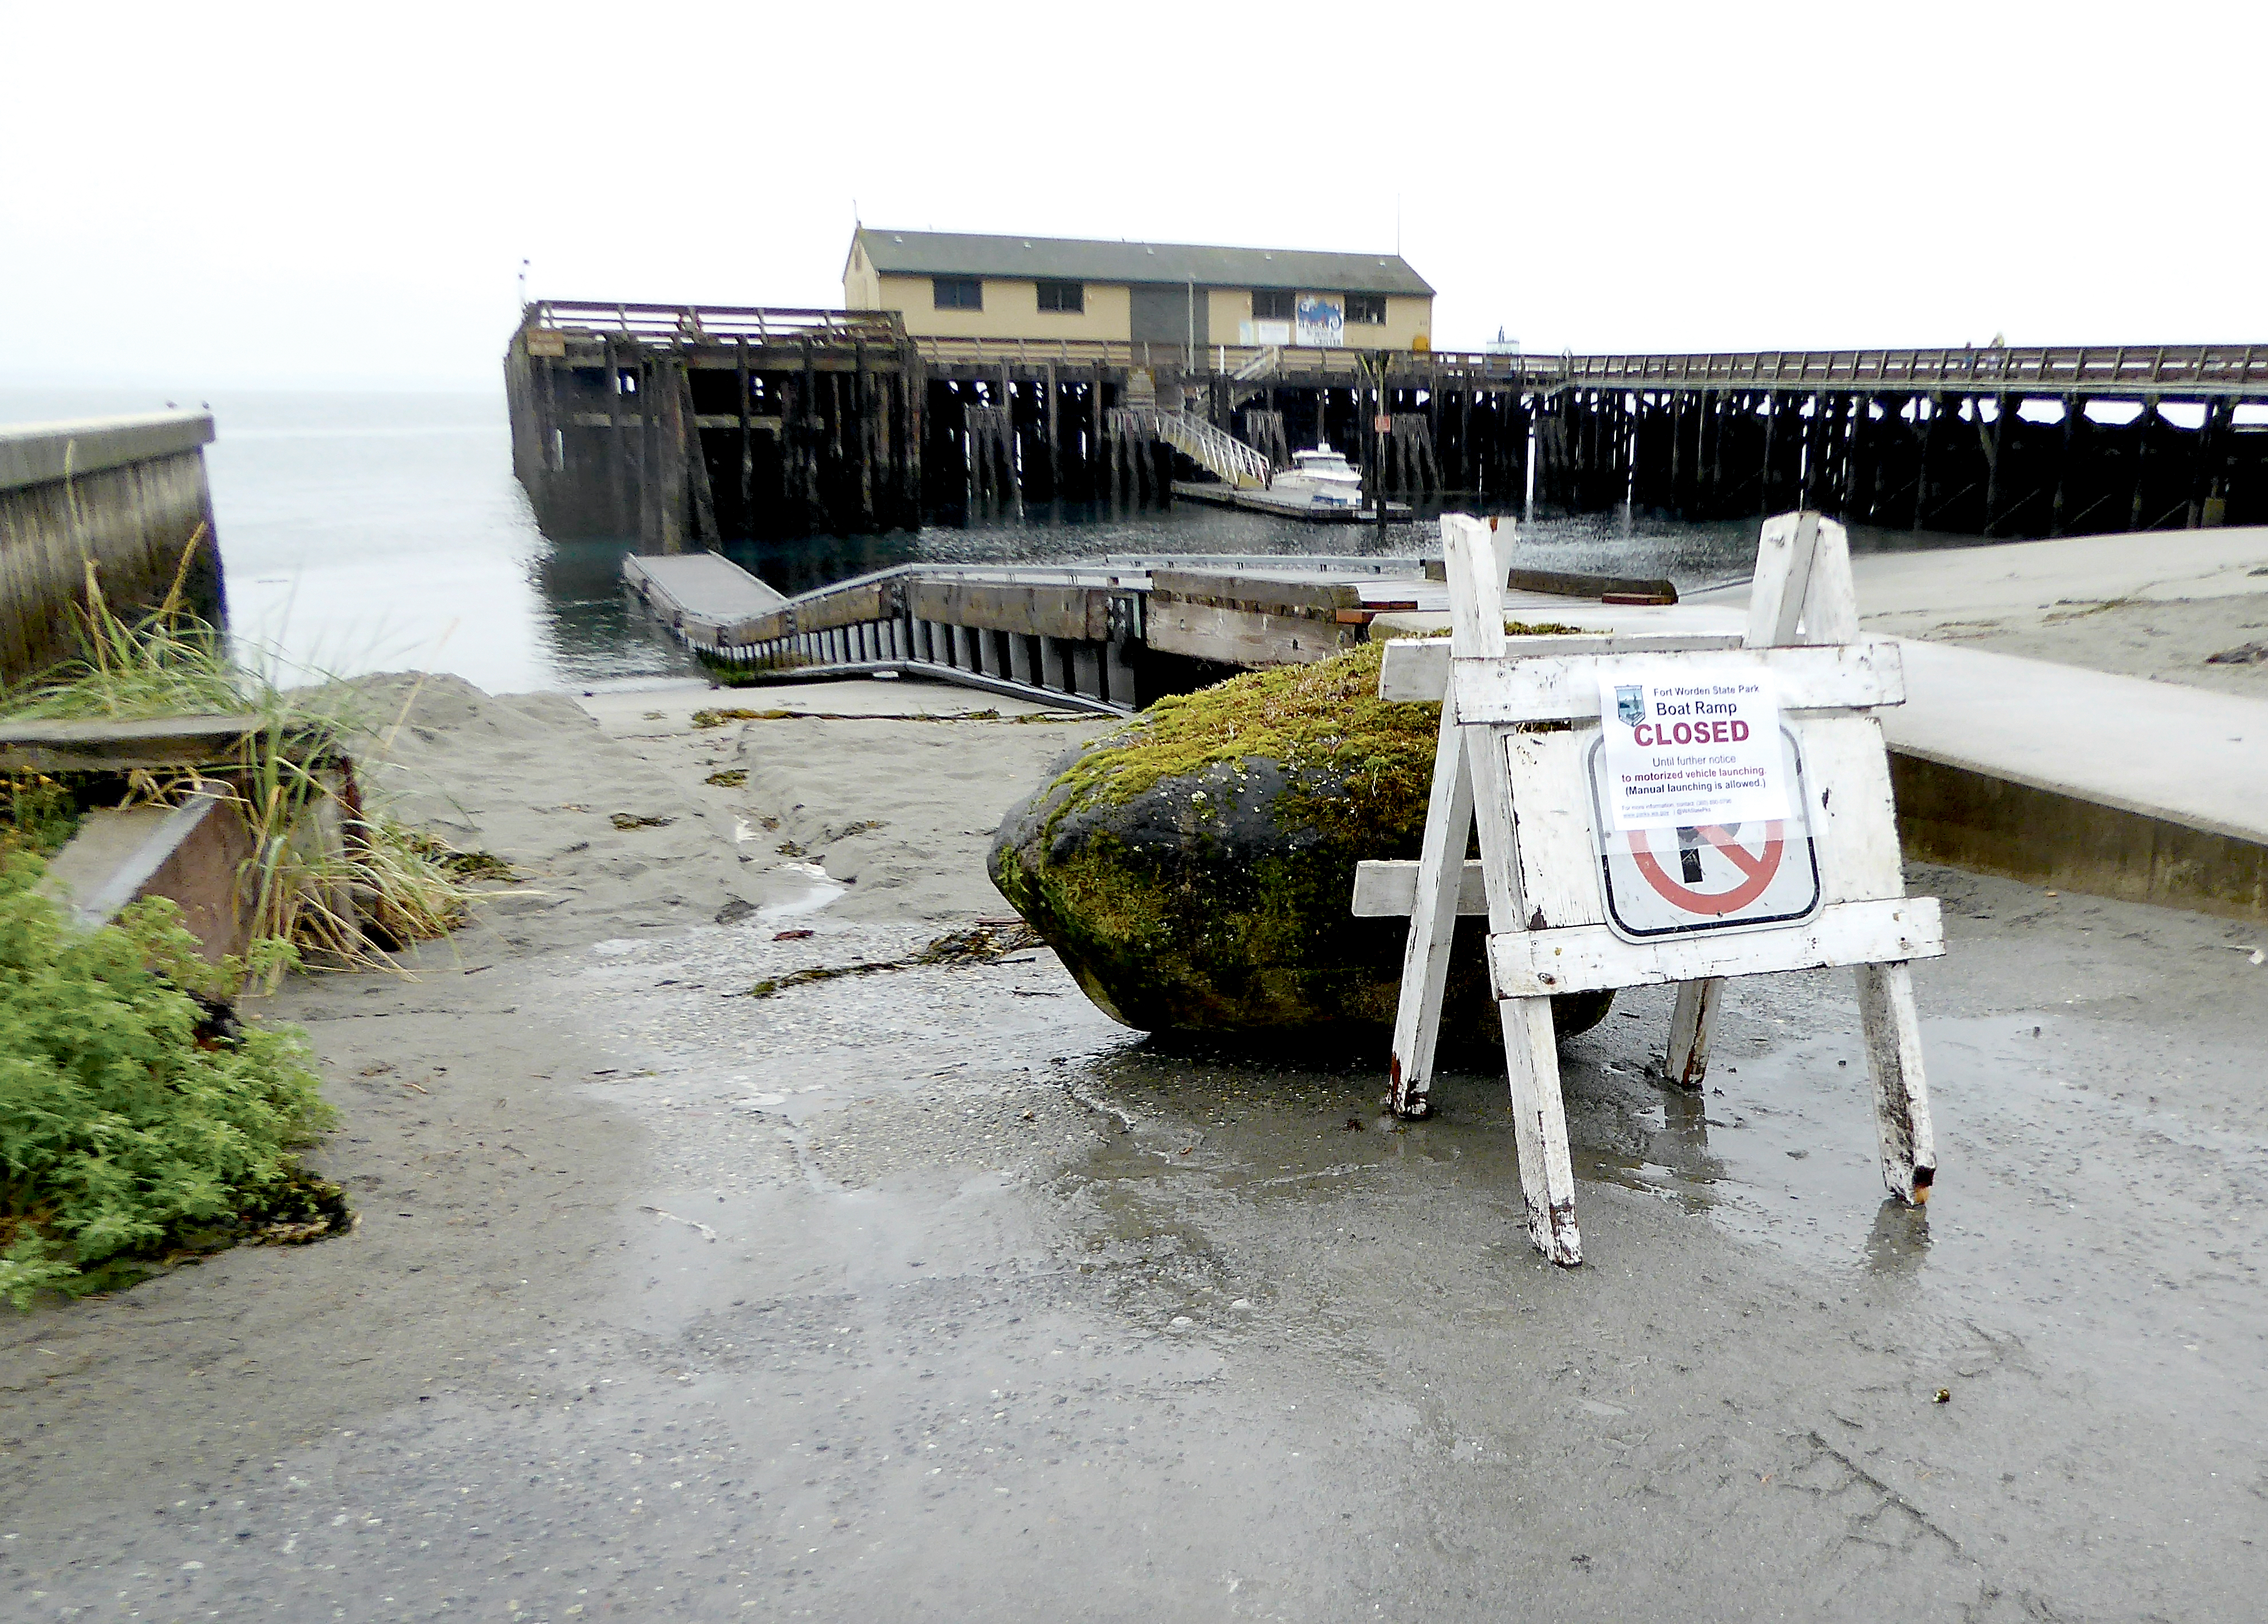 Park personnel moved a boulder in front of the Fort Worden State Park boat ramp to enforce its closure. — Charlie Bermant/Peninsula Daily News